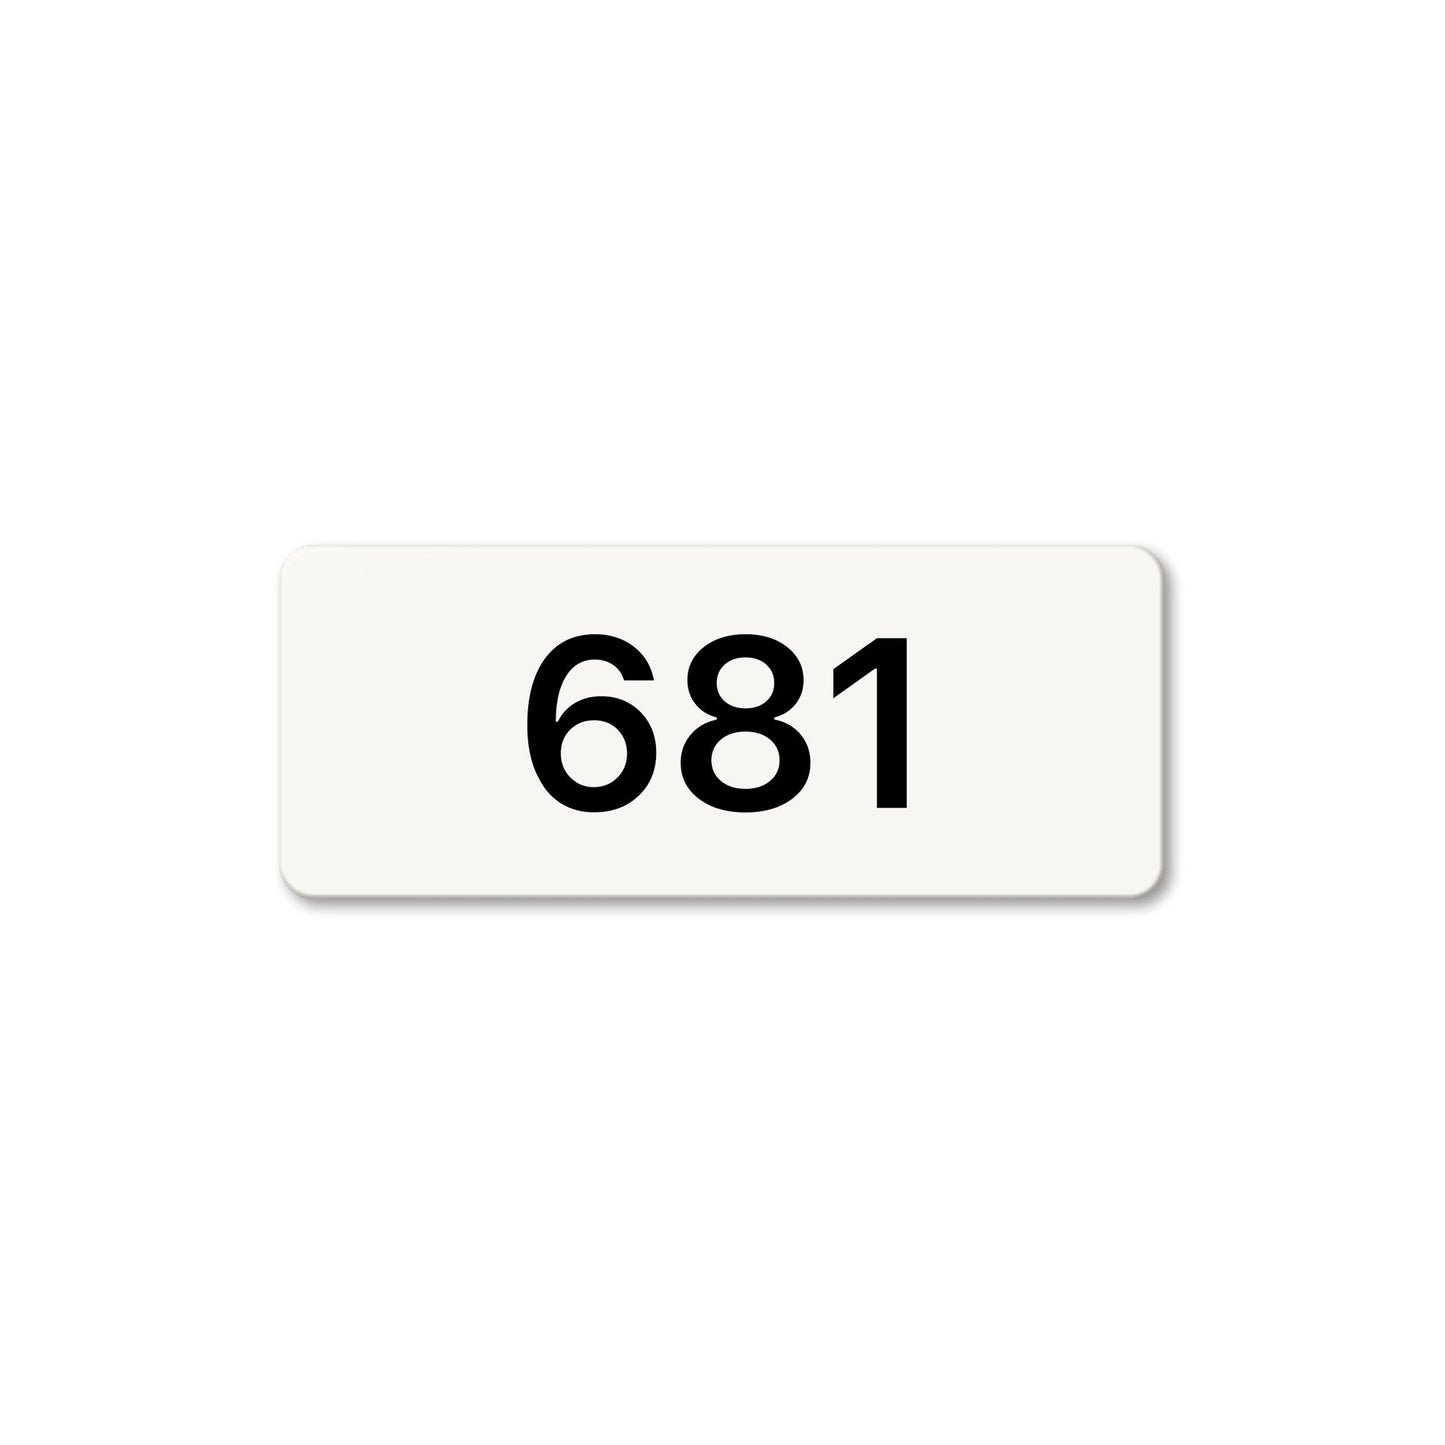 Numeral 681